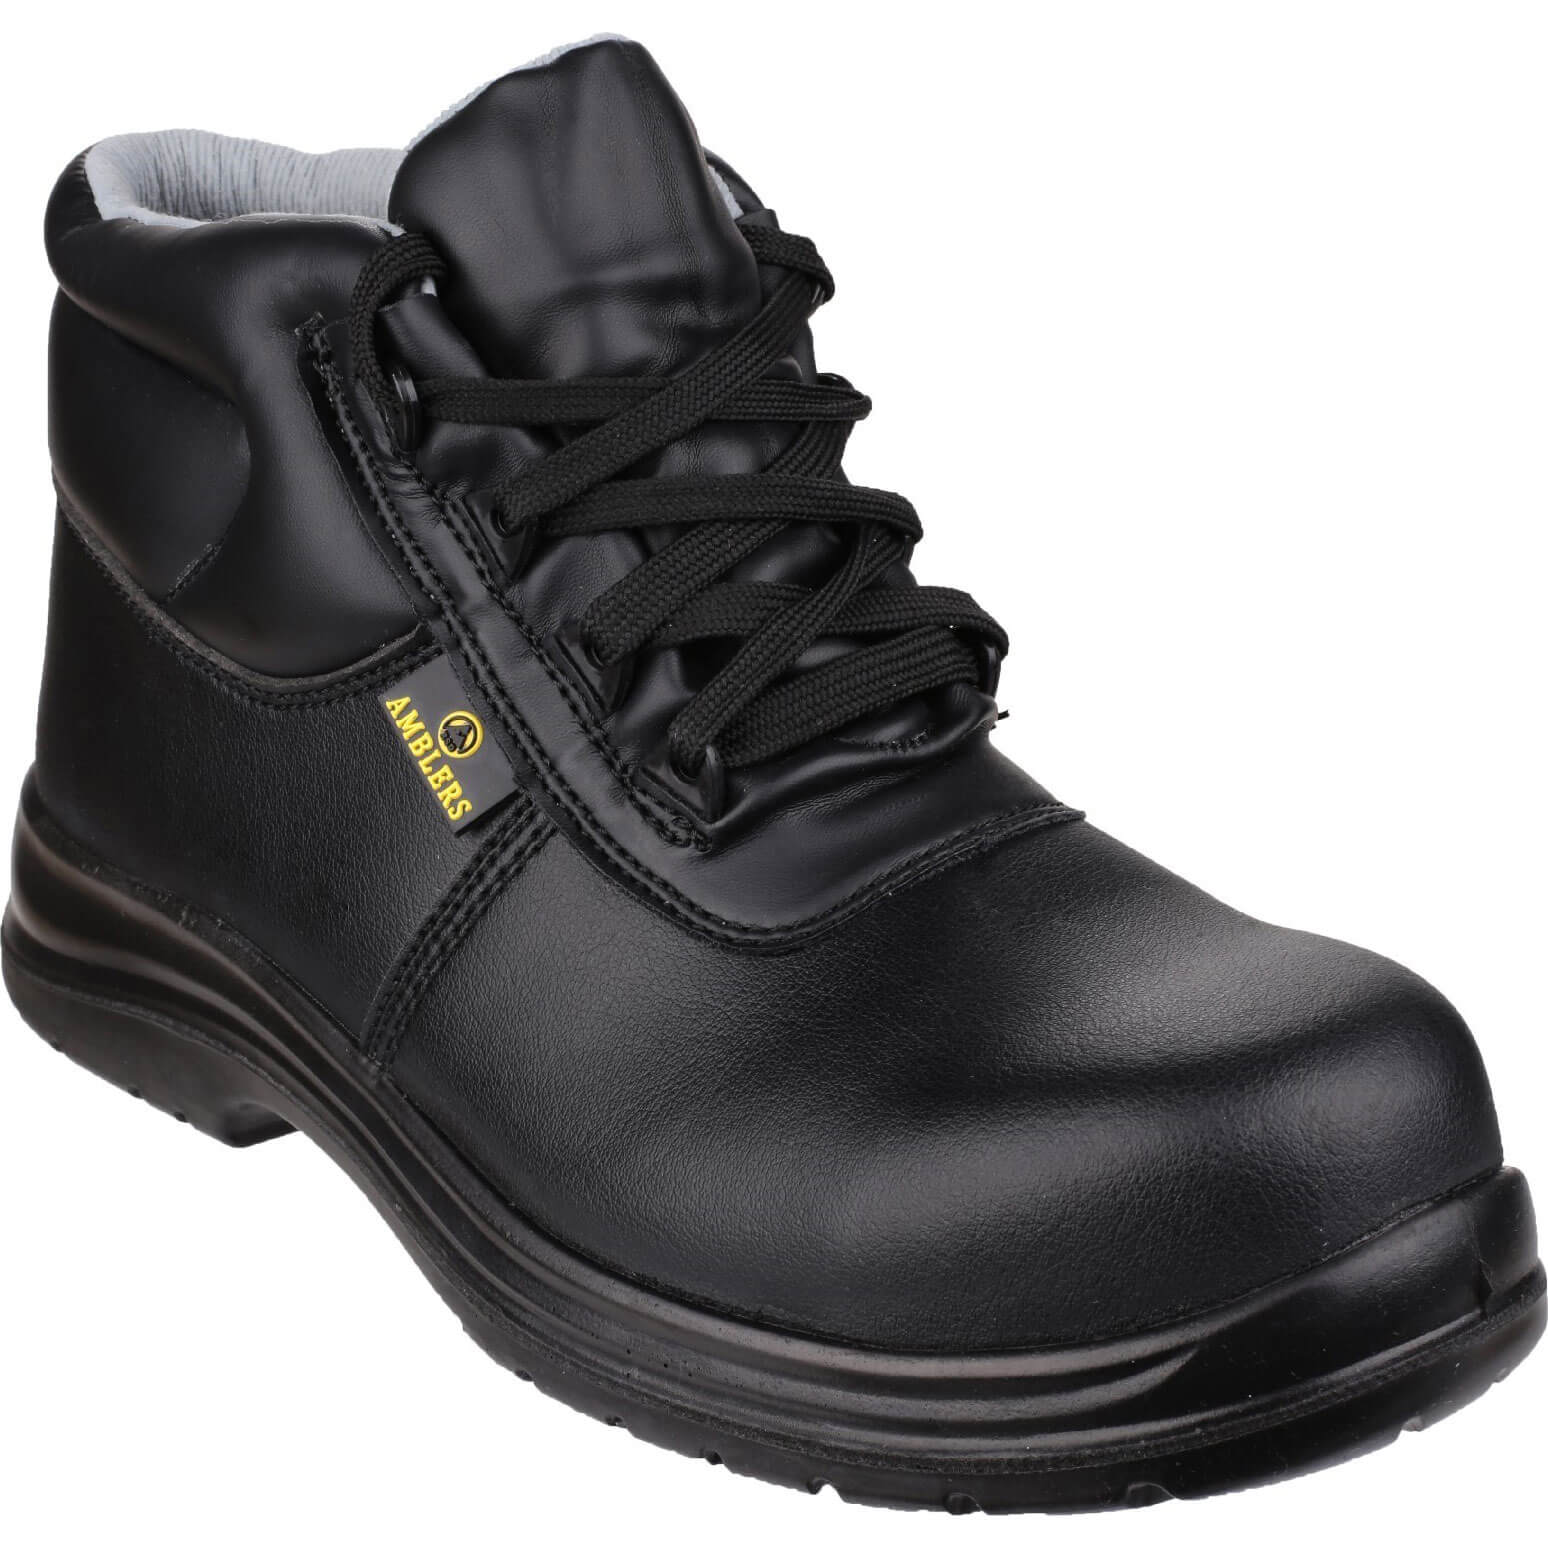 Photo of Amblers Mens Safety Fs663 Metal-free Water-resistant Safety Boots Black Size 6